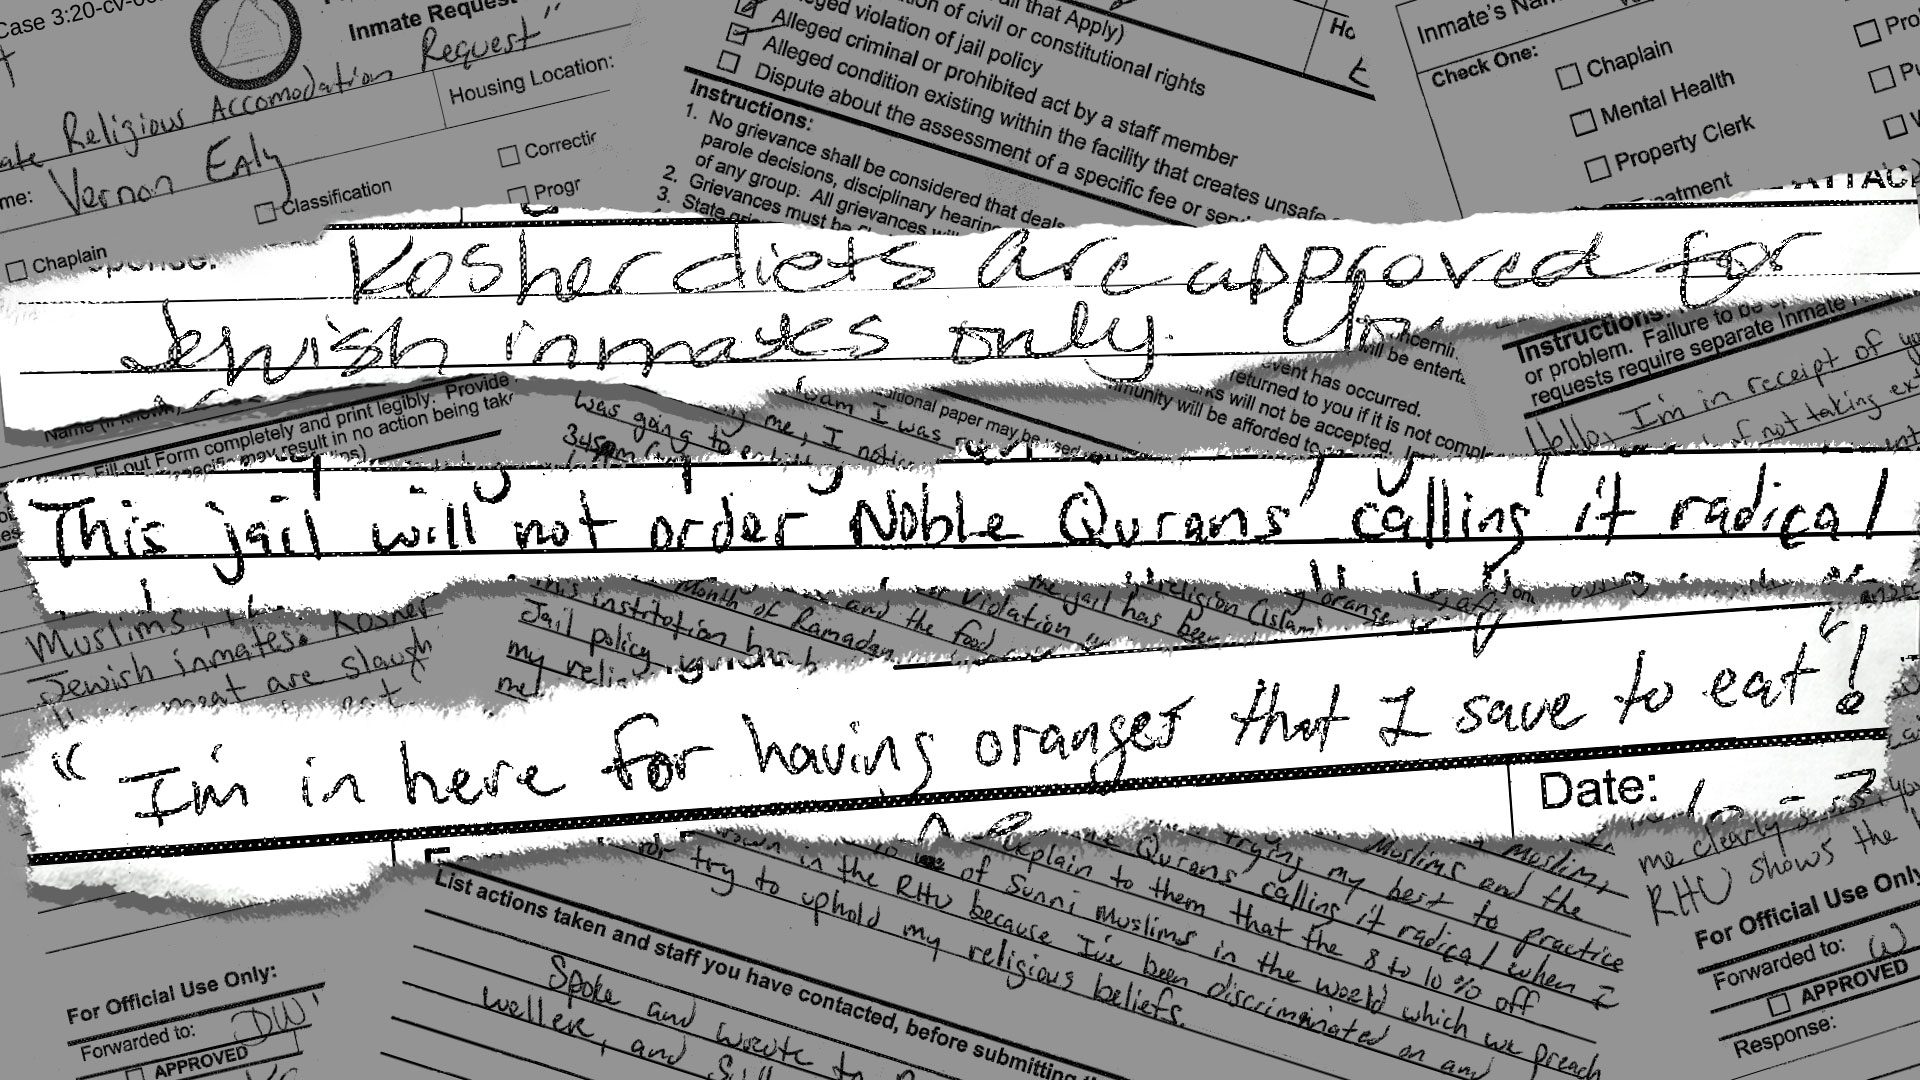 Excerpts from grievances filed by Muslim inmates held at the Franklin County Prison.